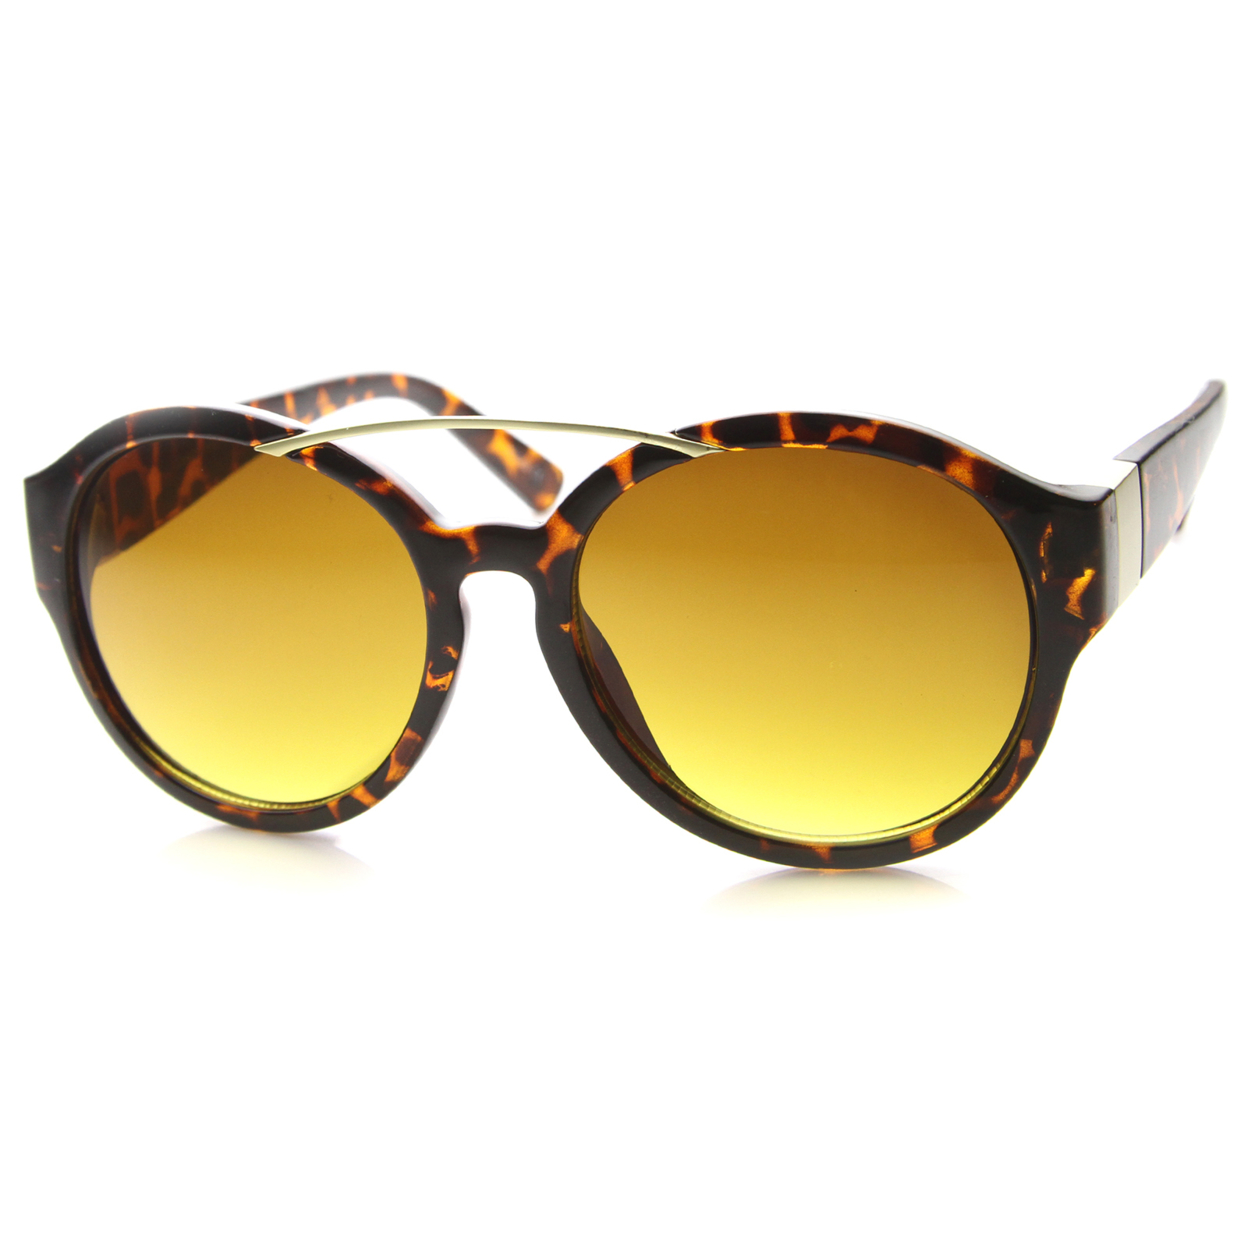 Womens Round Sunglasses With UV400 Protected Composite Lens 9920 - Shiny Tortoise-Gold / Amber